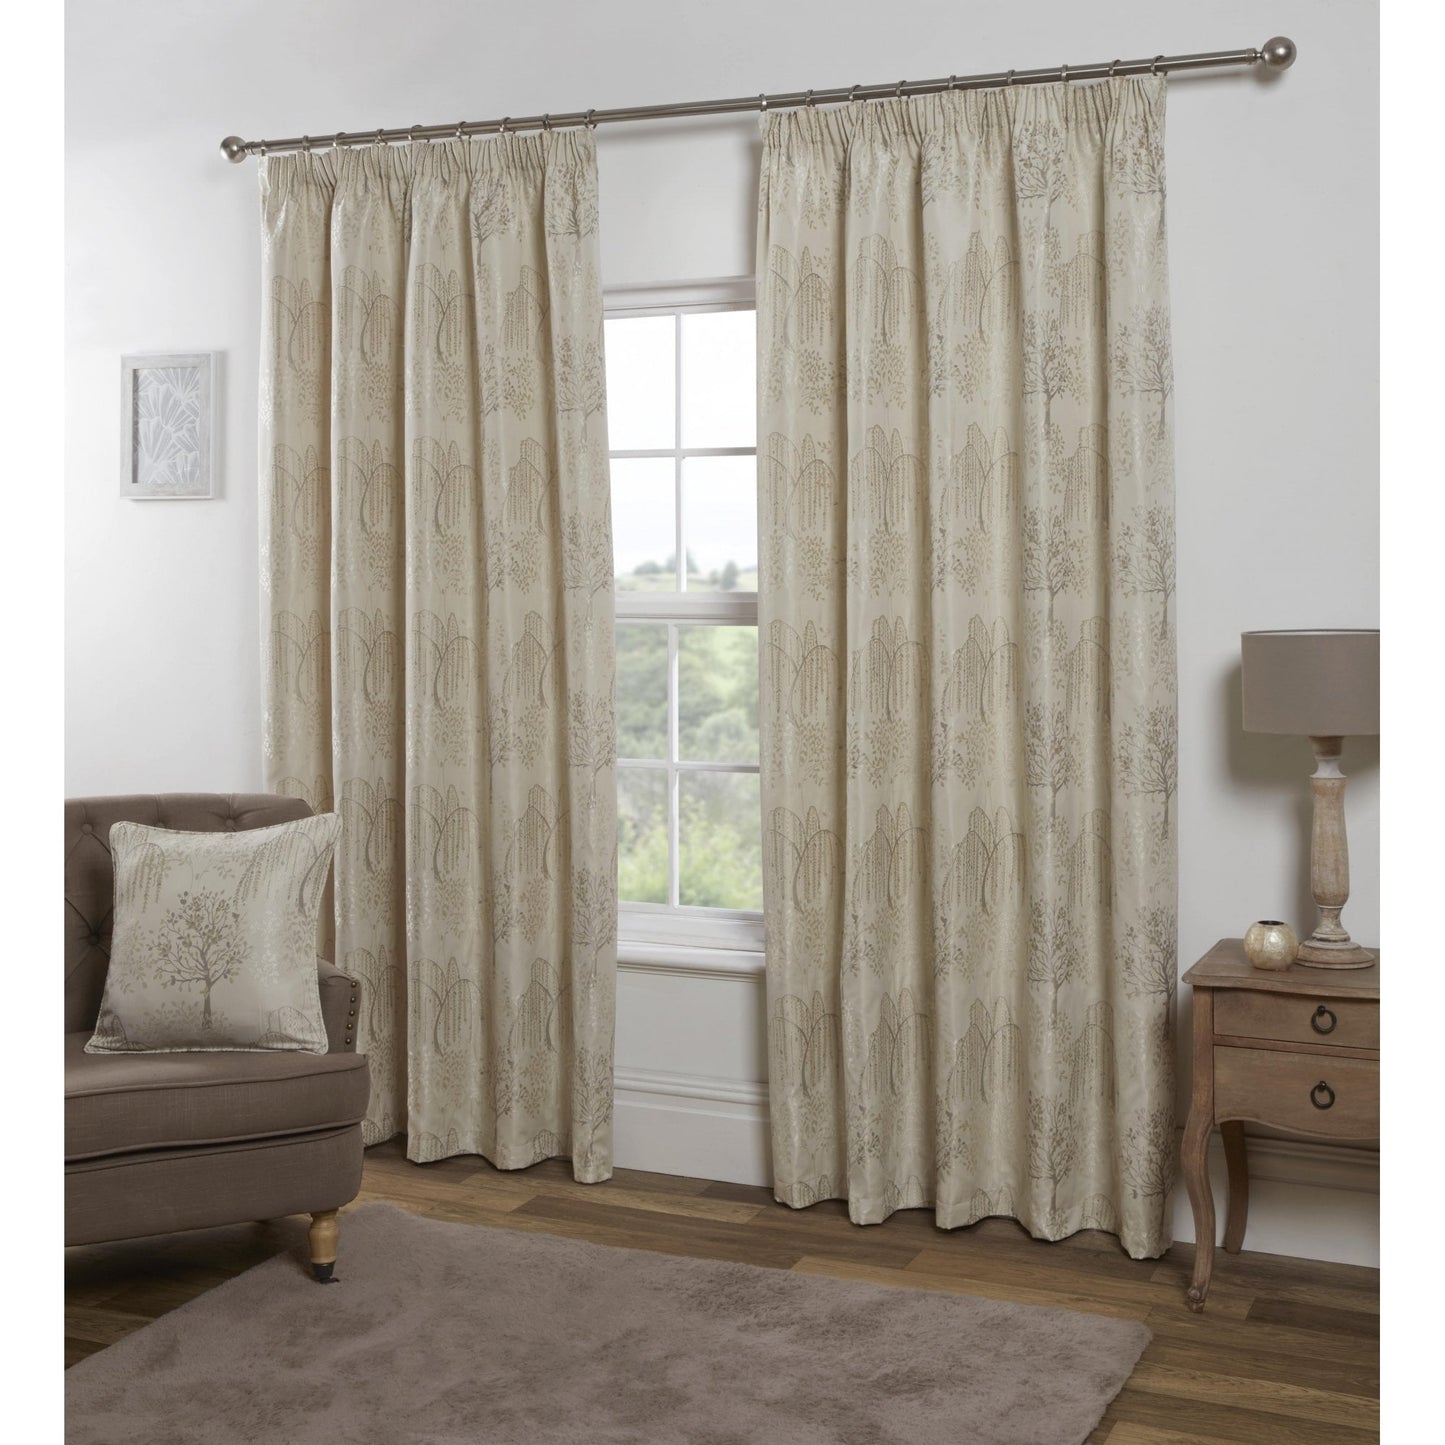 Orchard Tape Patterned Eyelet Curtains - Ivory